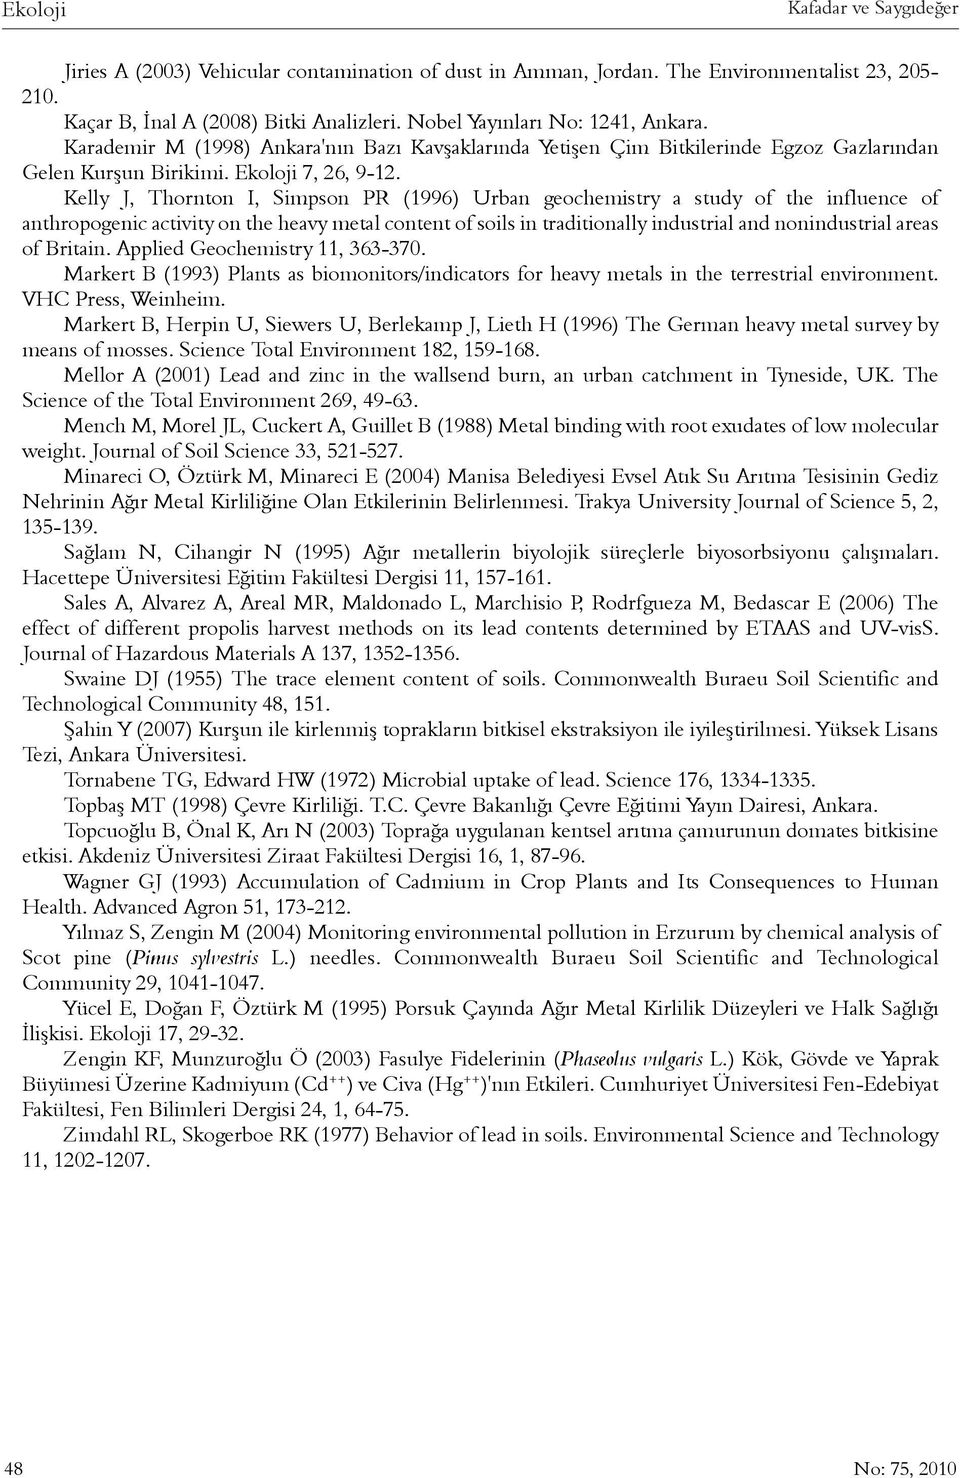 Kelly J, Thornton I, Simpson PR (1996) Urban geochemistry a study of the influence of anthropogenic activity on the heavy metal content of soils in traditionally industrial and nonindustrial areas of